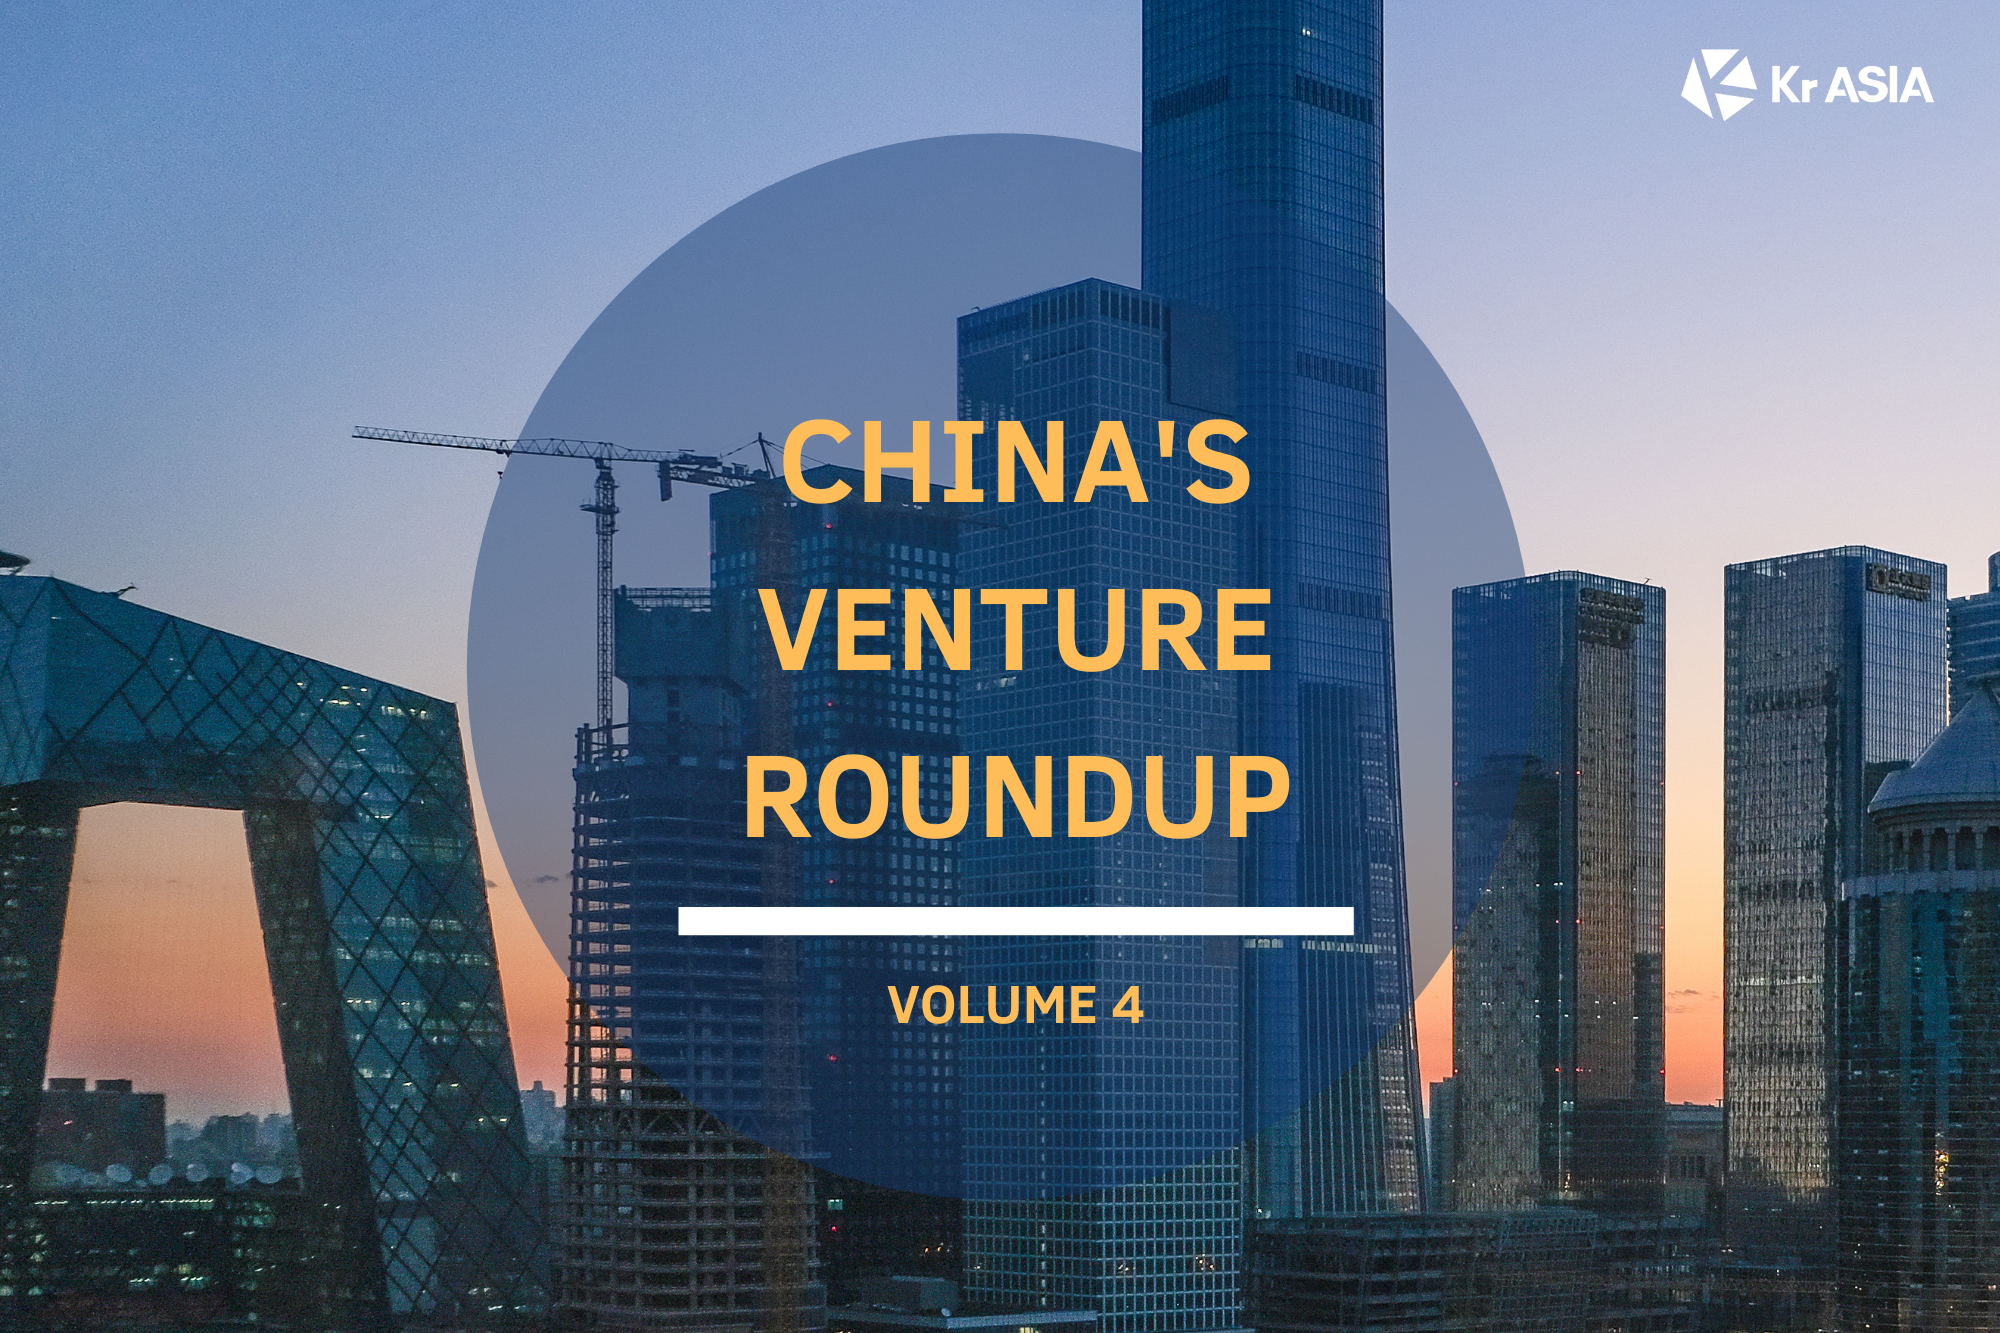 China’s Venture Roundup Volume 4 | Beauty giant Perfect Diary on track to USD 4 billion valuation